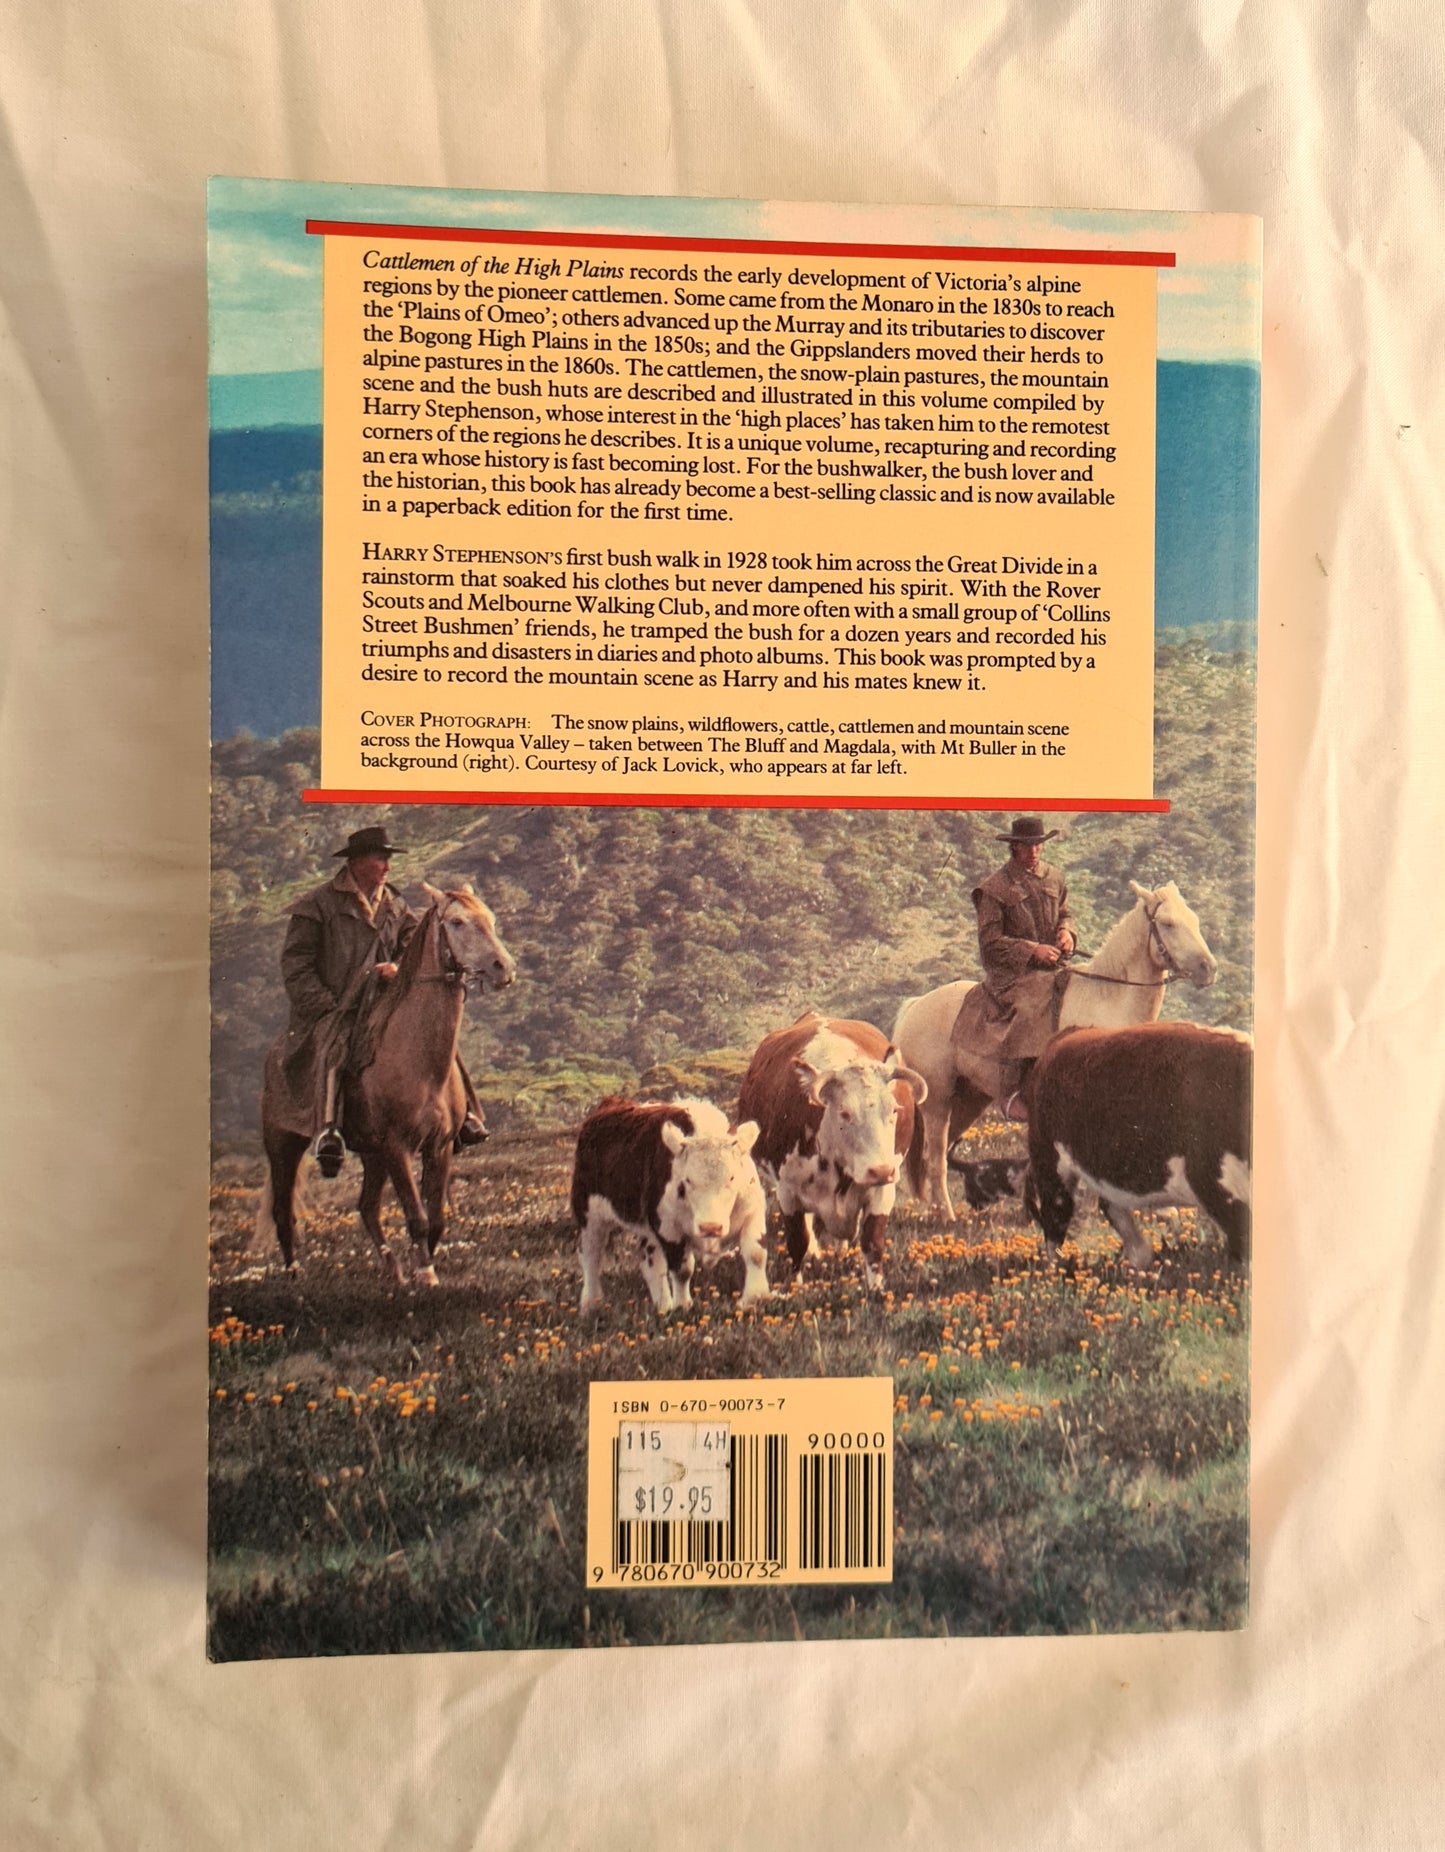 Cattlemen & Huts of the High Plains by Harry Stephenson